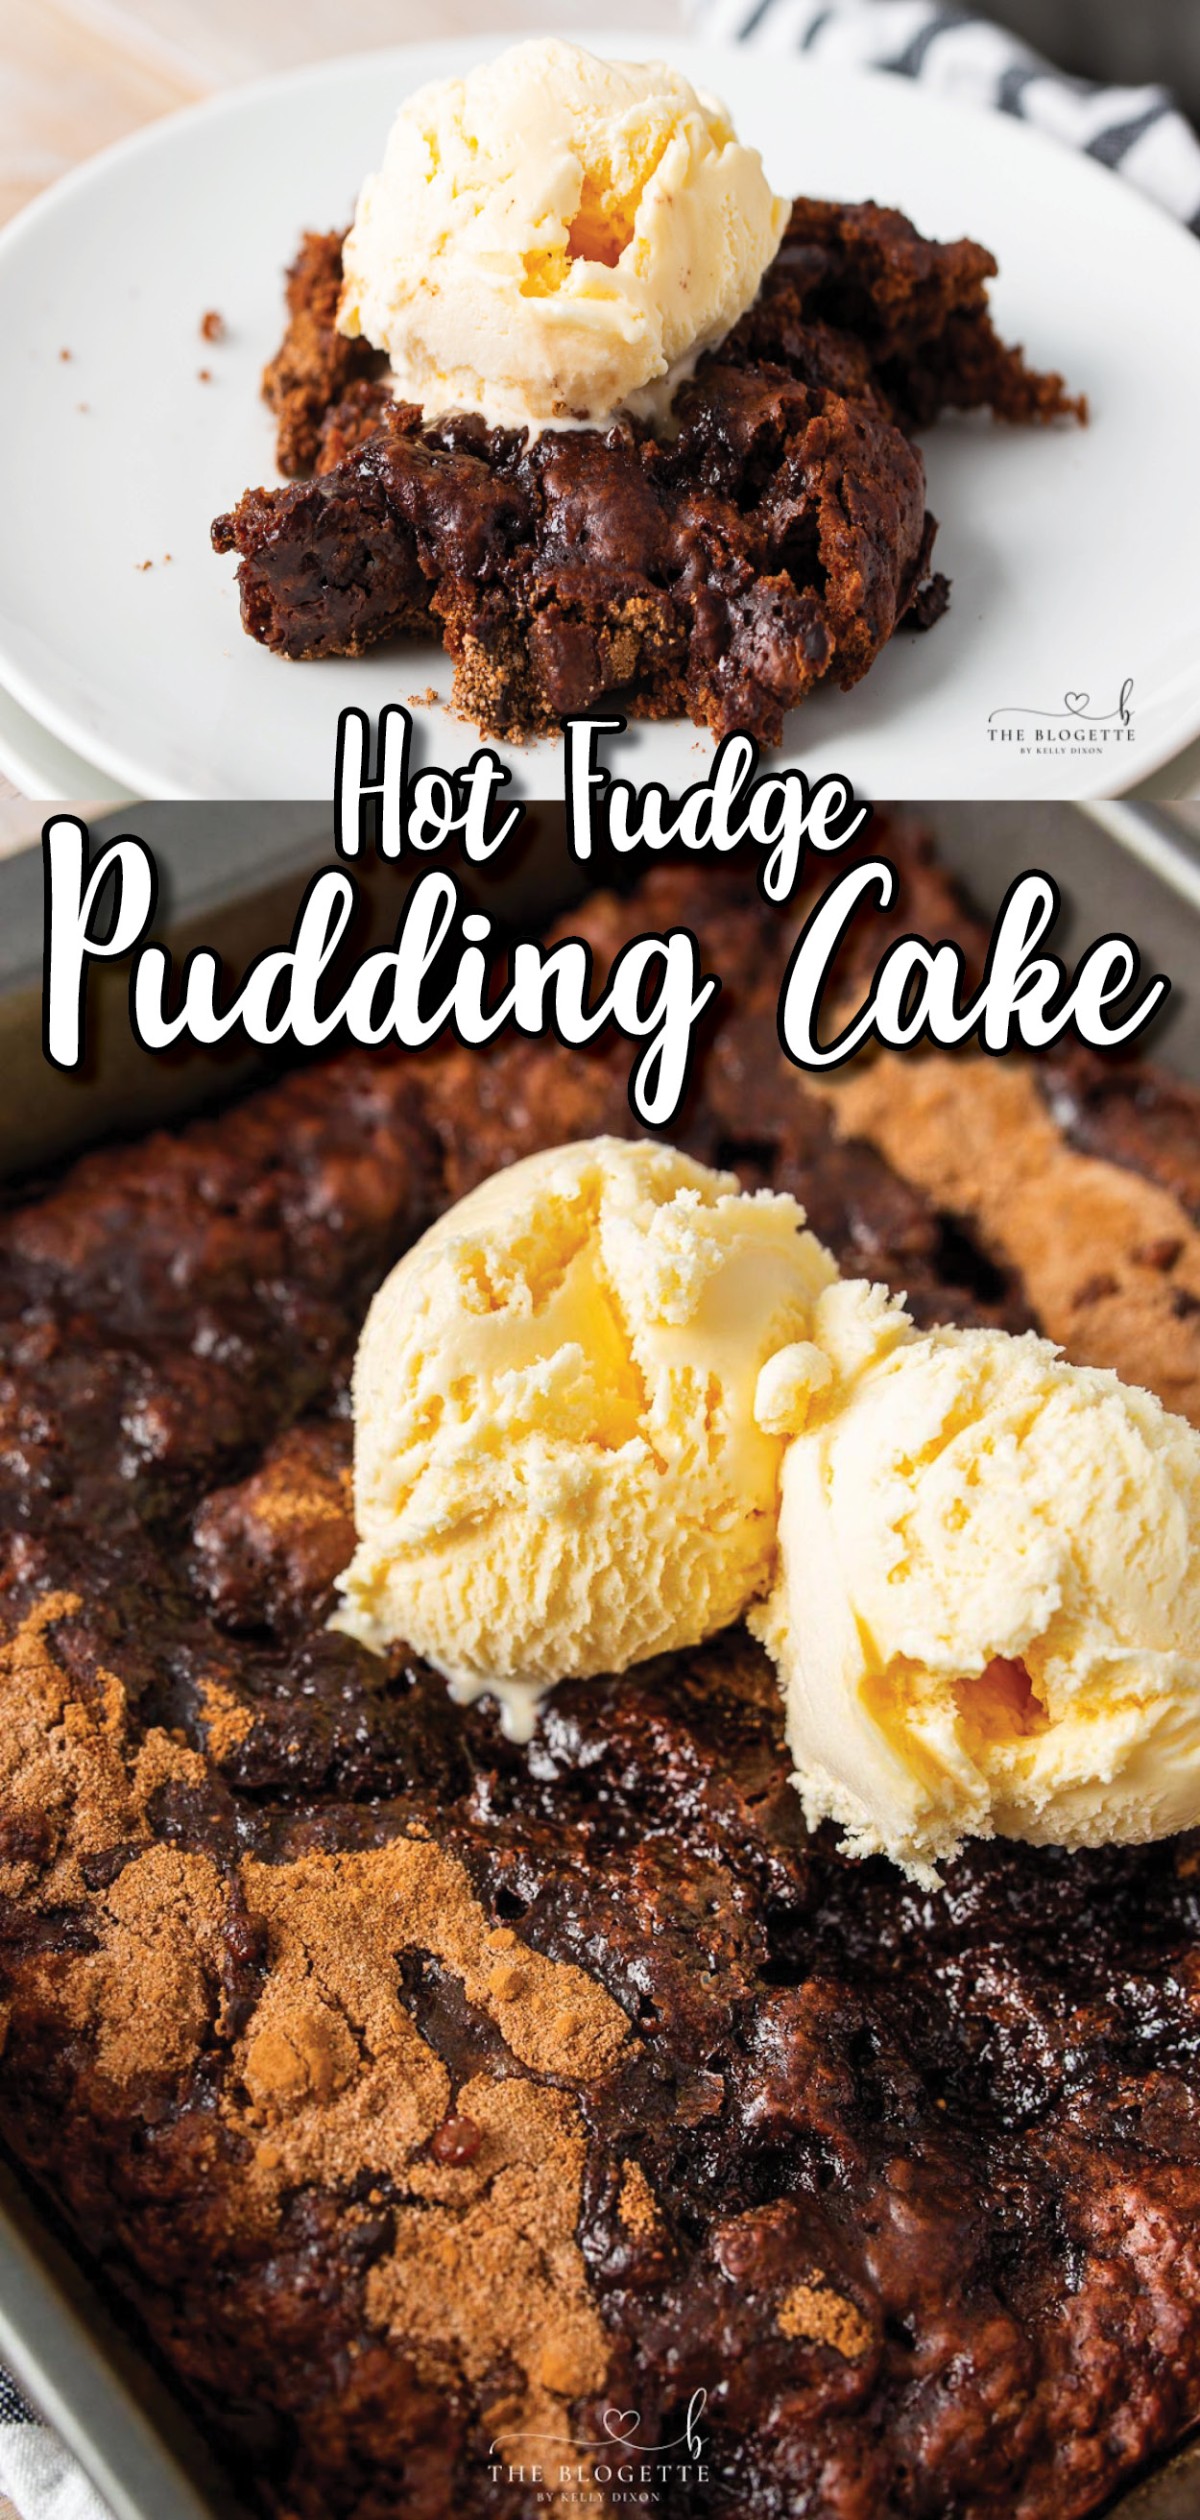 Hot fudge pudding cake is an easy, quick, and beautiful chocolate dessert that everyone absolutely loves! This delicious chocolate cake is simply wonderful when eaten with whipped cream or ice cream. Make it when you get your next sweet tooth. Who doesn't love chocolate?